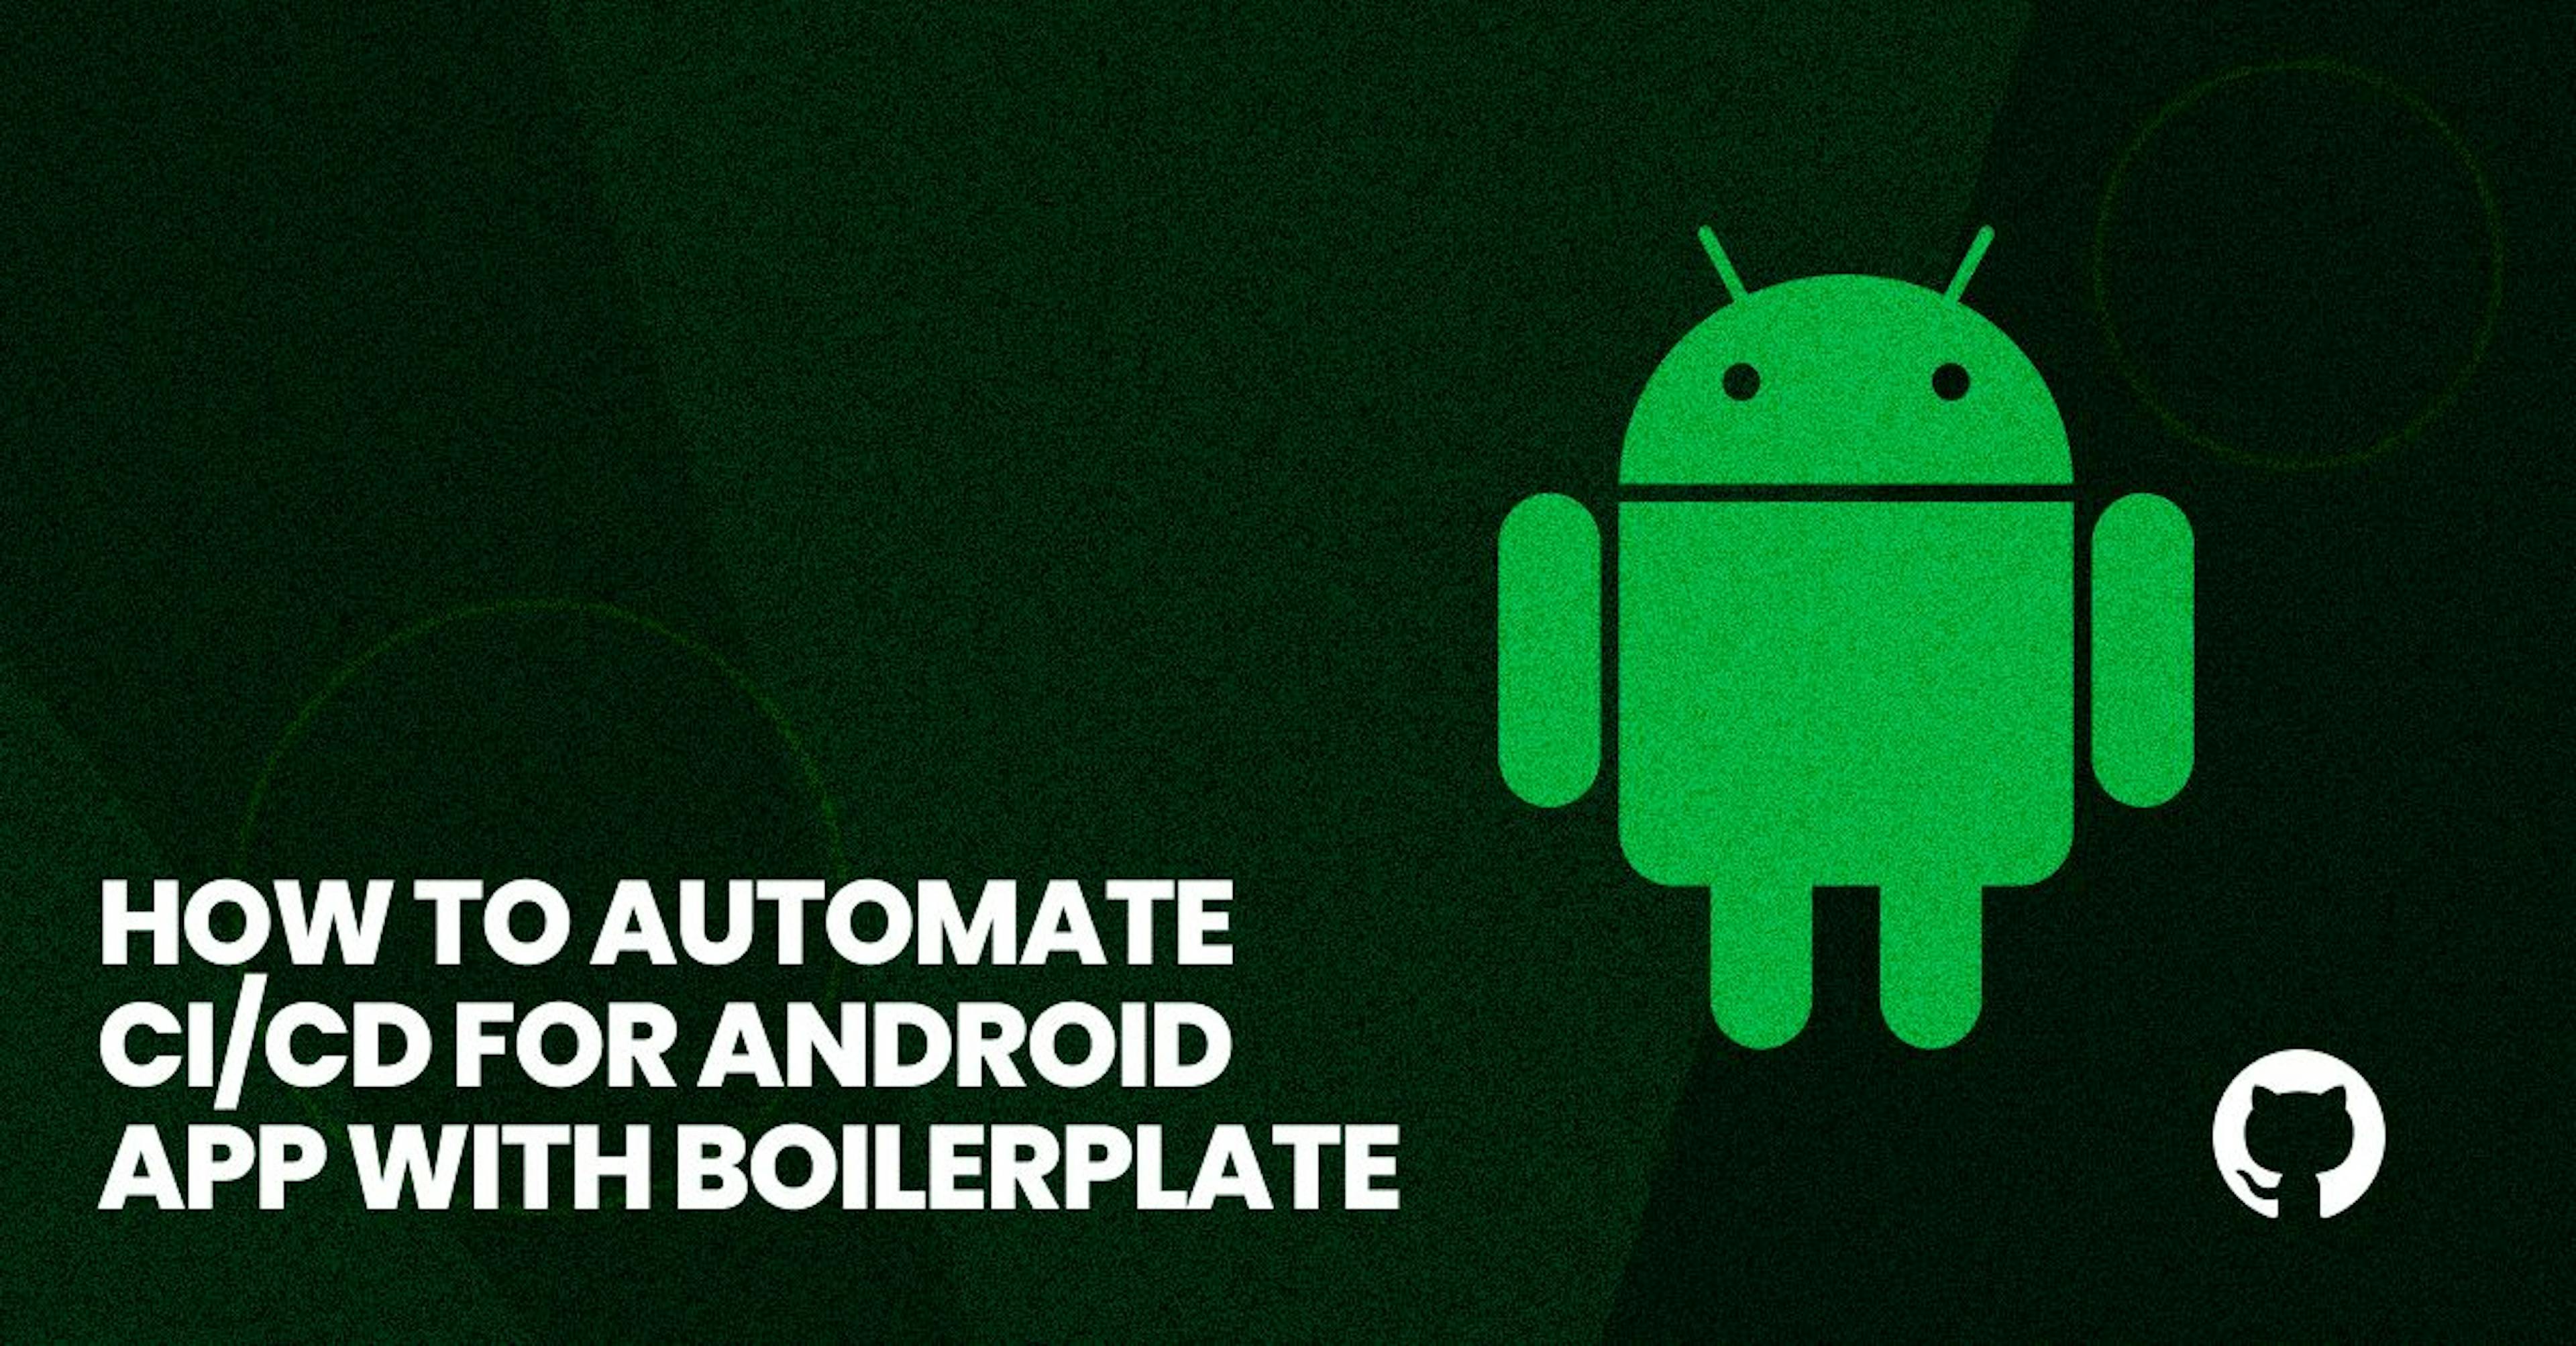 featured image - Android CI/CD Boilerplate for Publishing via Fastlane